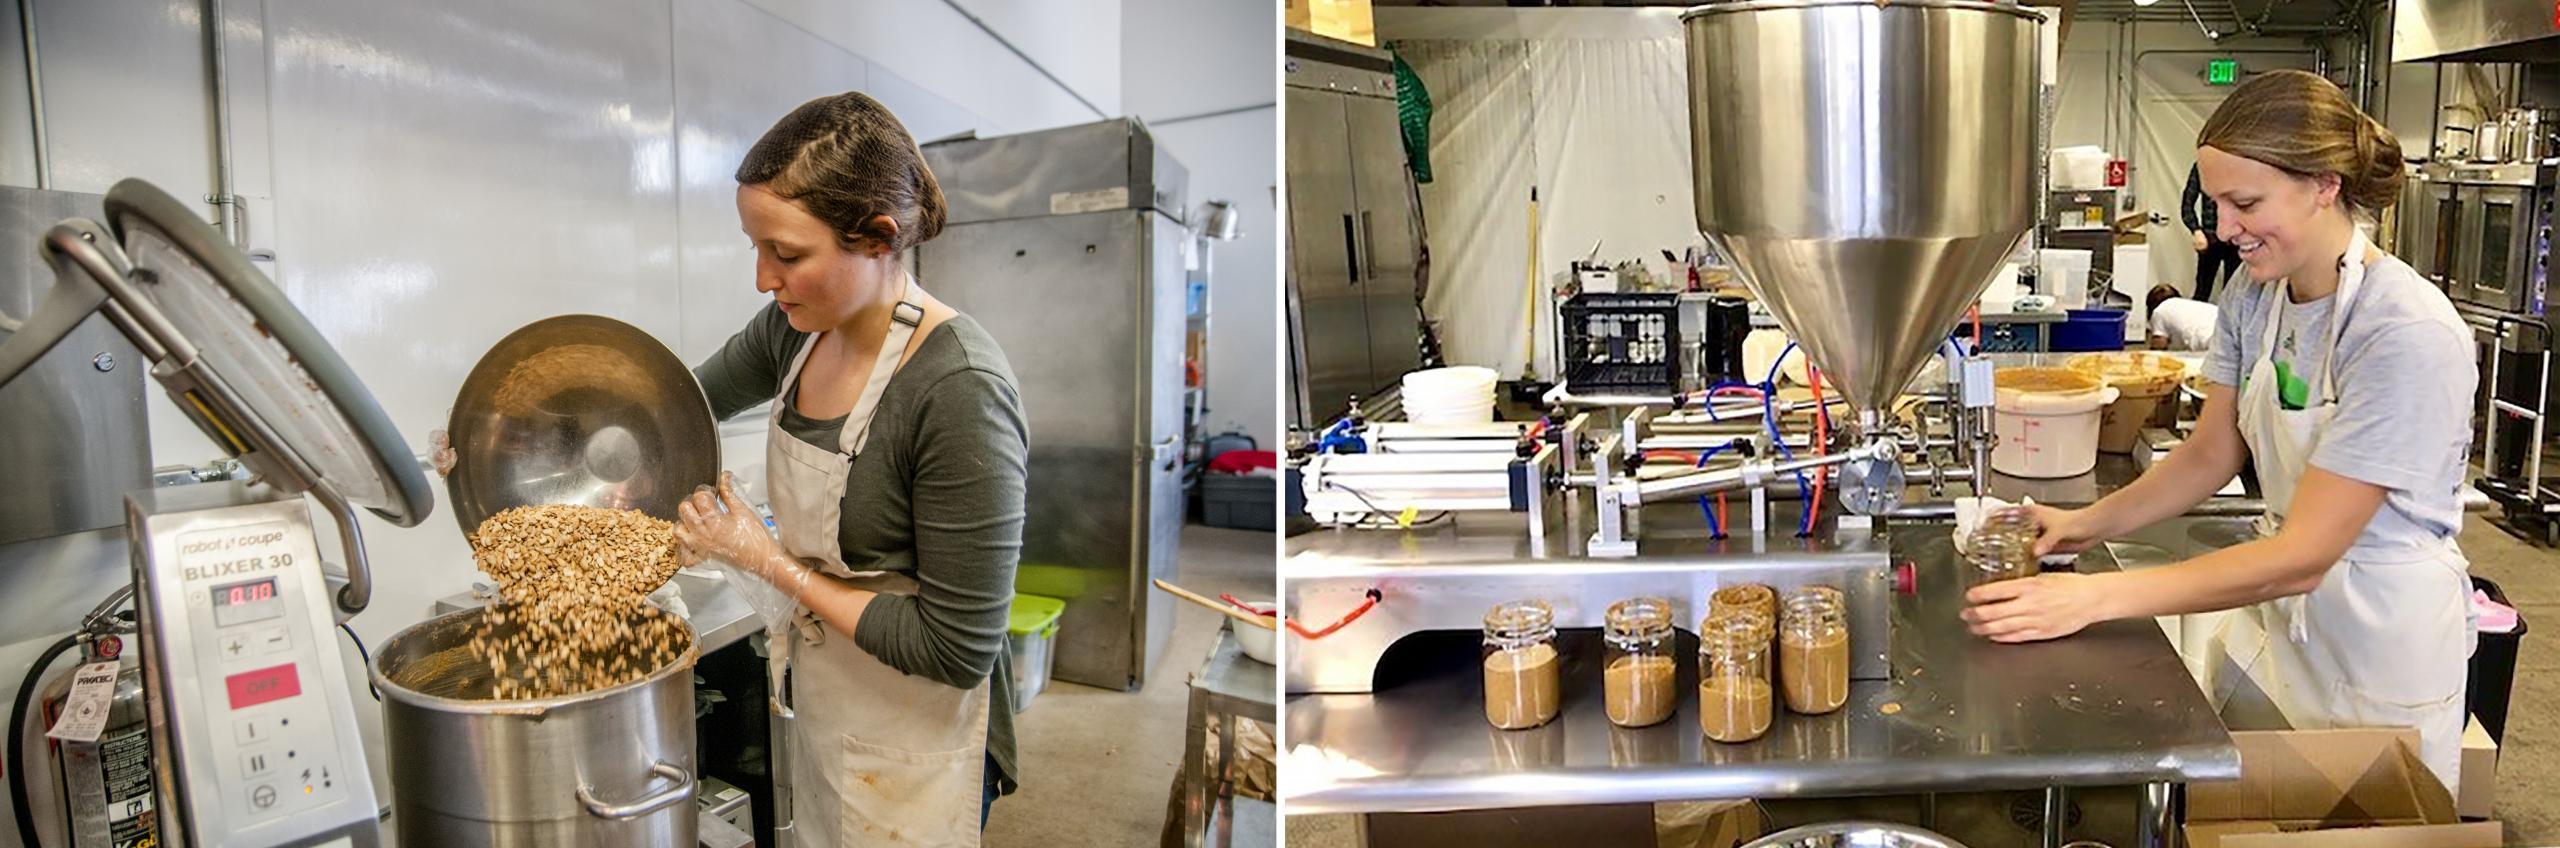 Two photos side-by-side. The left image shows a woman wearing an apron, hair net, and a long-sleeved T-shirt pouring a large stainless steel bowl of cashews into a stainless steel machine. The right photo shows a different woman also wearing an apron, hair net, and gray T-shirt using a machine to fill jars with nut butter.